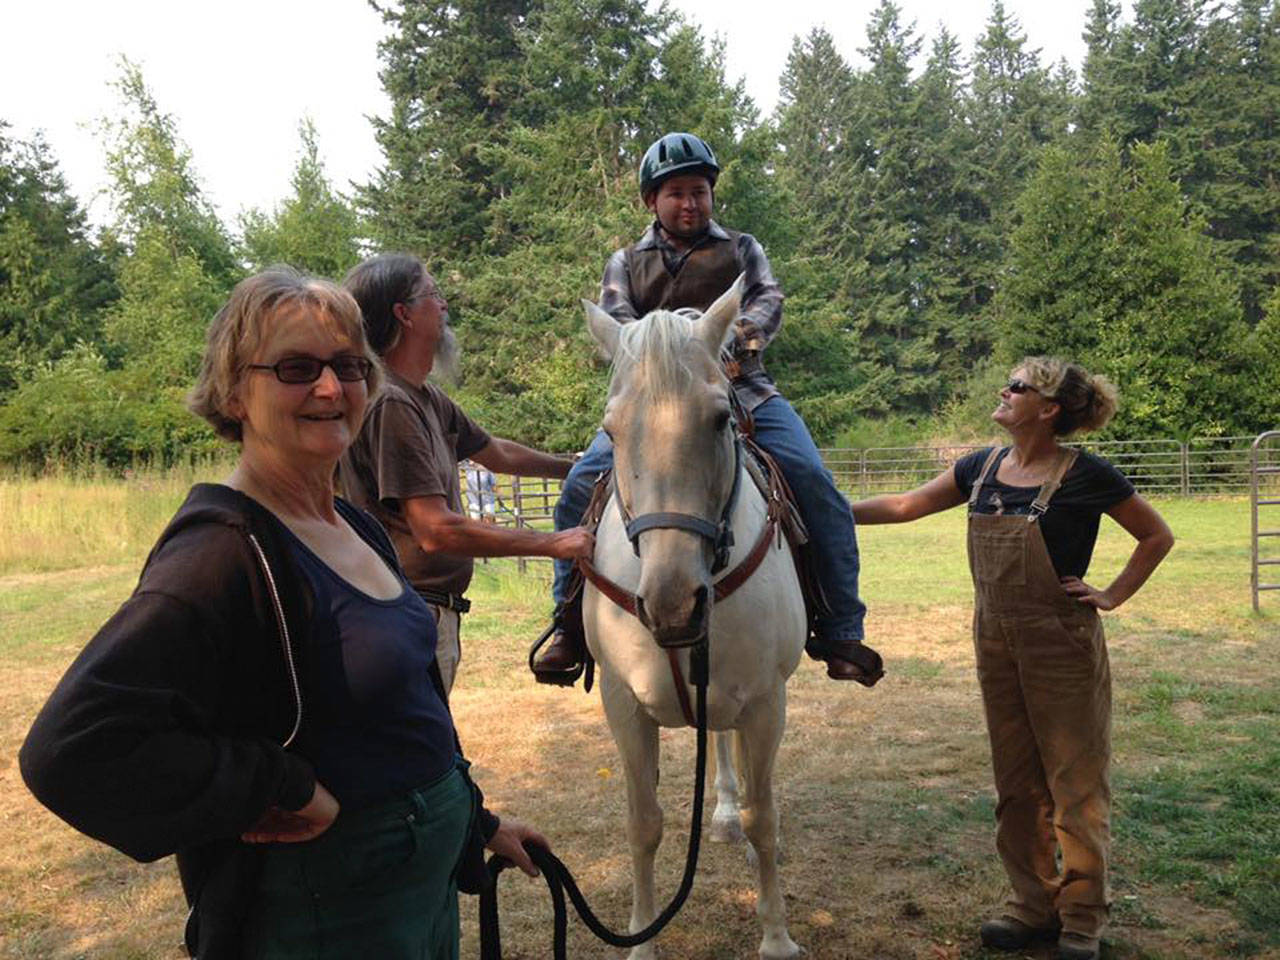 Garet Bonham, a Sequim resident and Special Olympics athlete, rides the trails during summer camp at Camp Beausite NW, thanks to volunteers and horses from the Buckhorn Chapter of Backcountry Horsemen. (Camp Beausite NW)